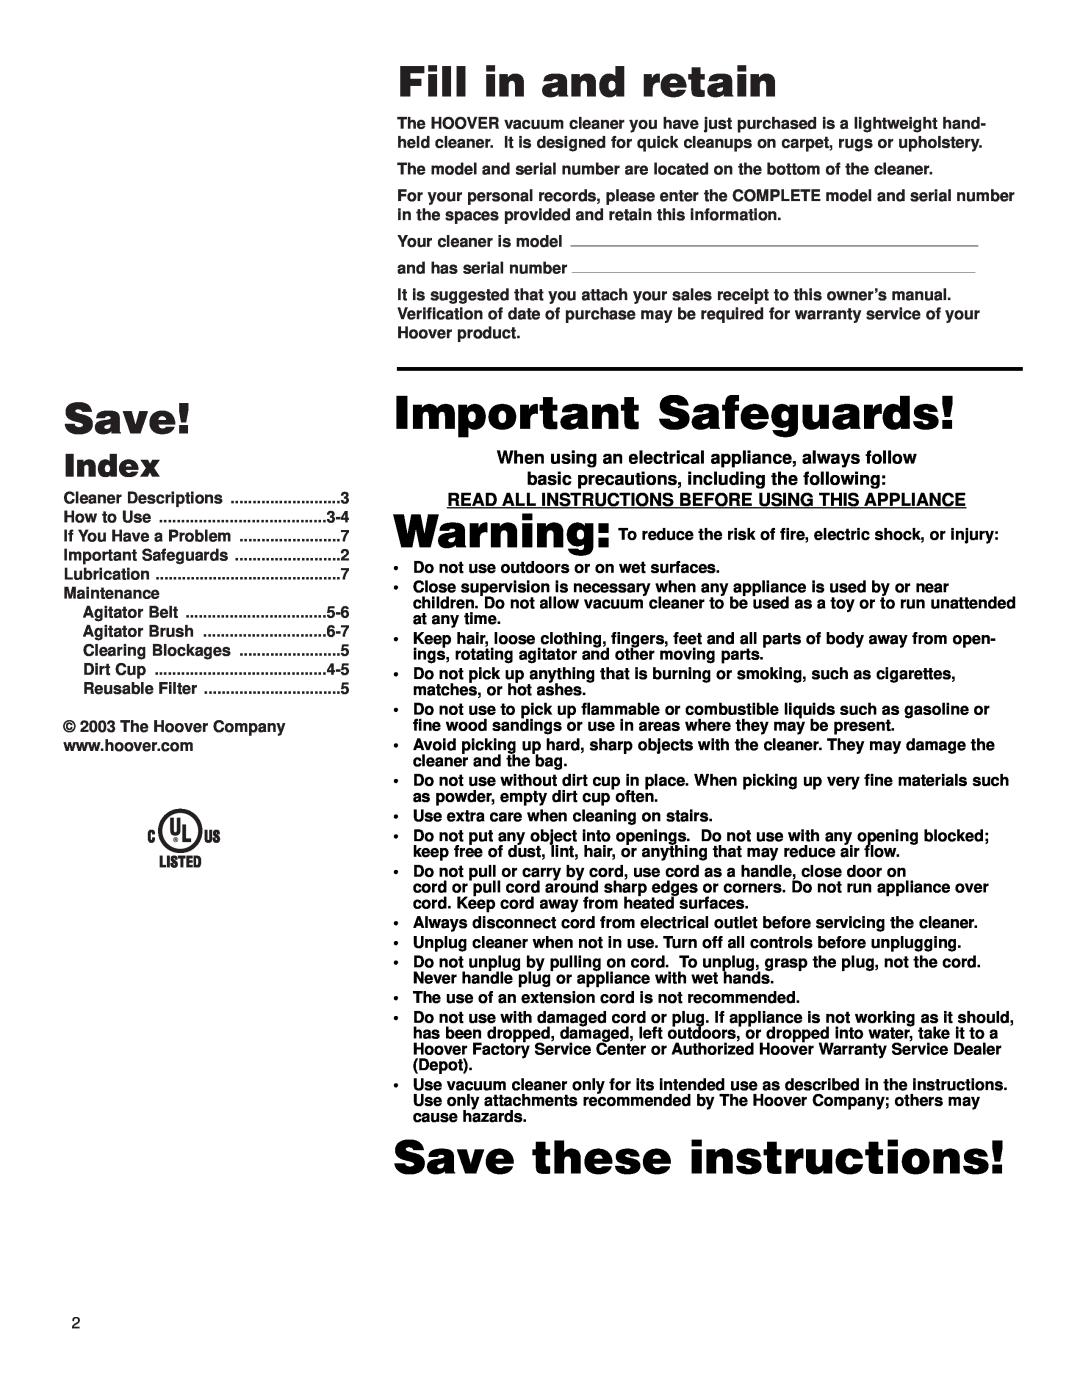 Hoover Sidewinder owner manual Index, Important Safeguards, Save these instructions, Fill in and retain 